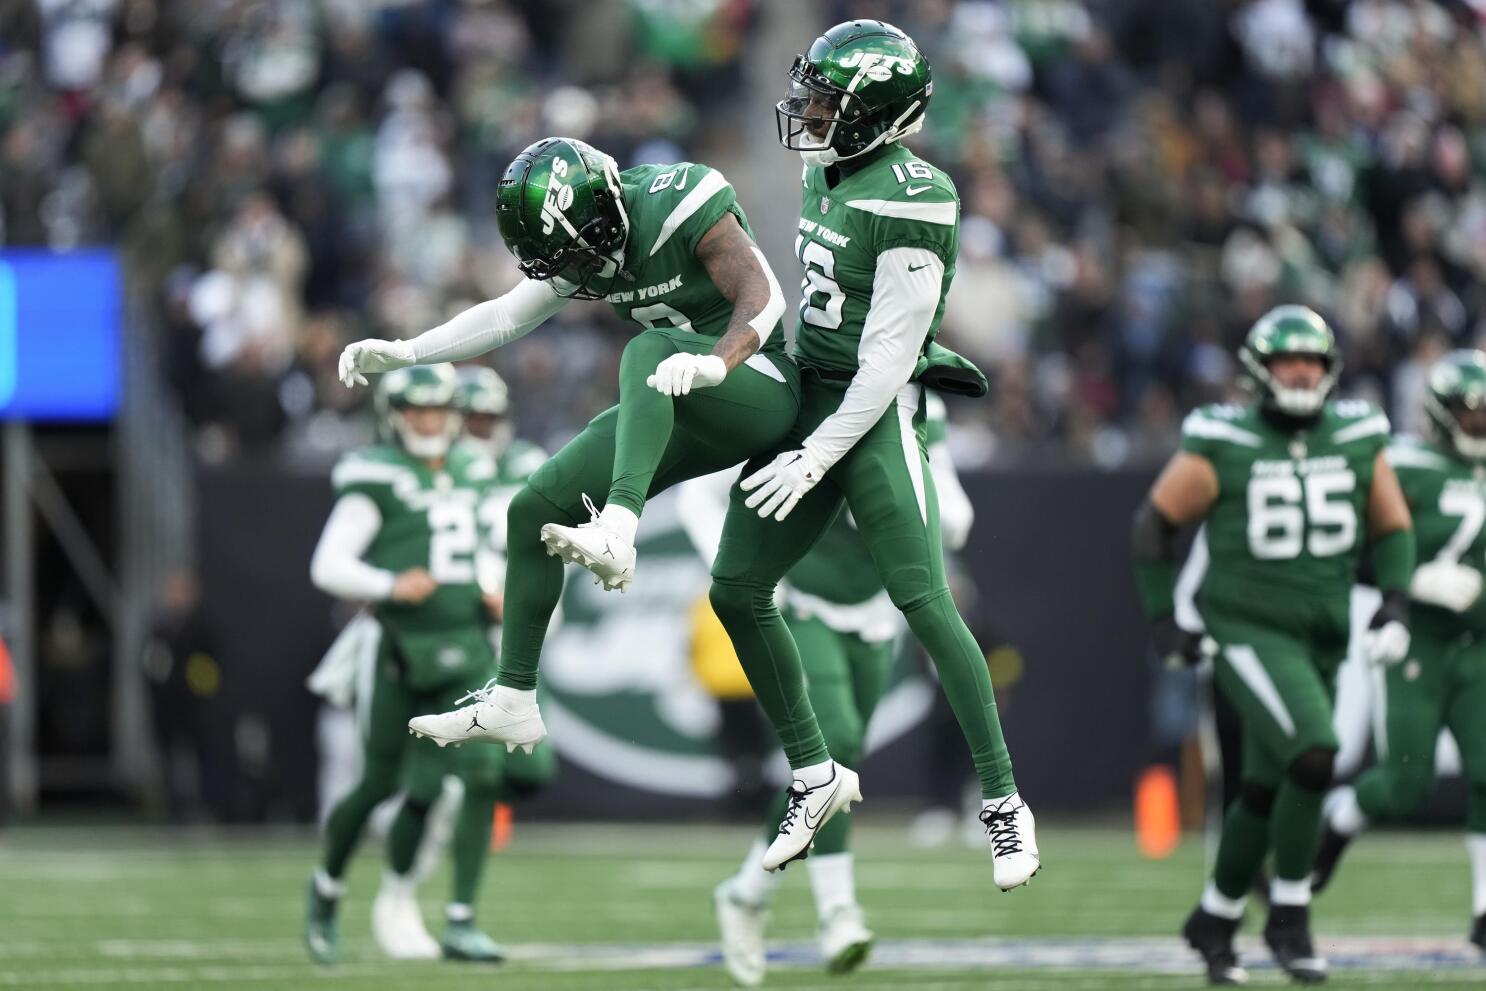 Jets, Jaguars square off looking to keep playoff hopes alive